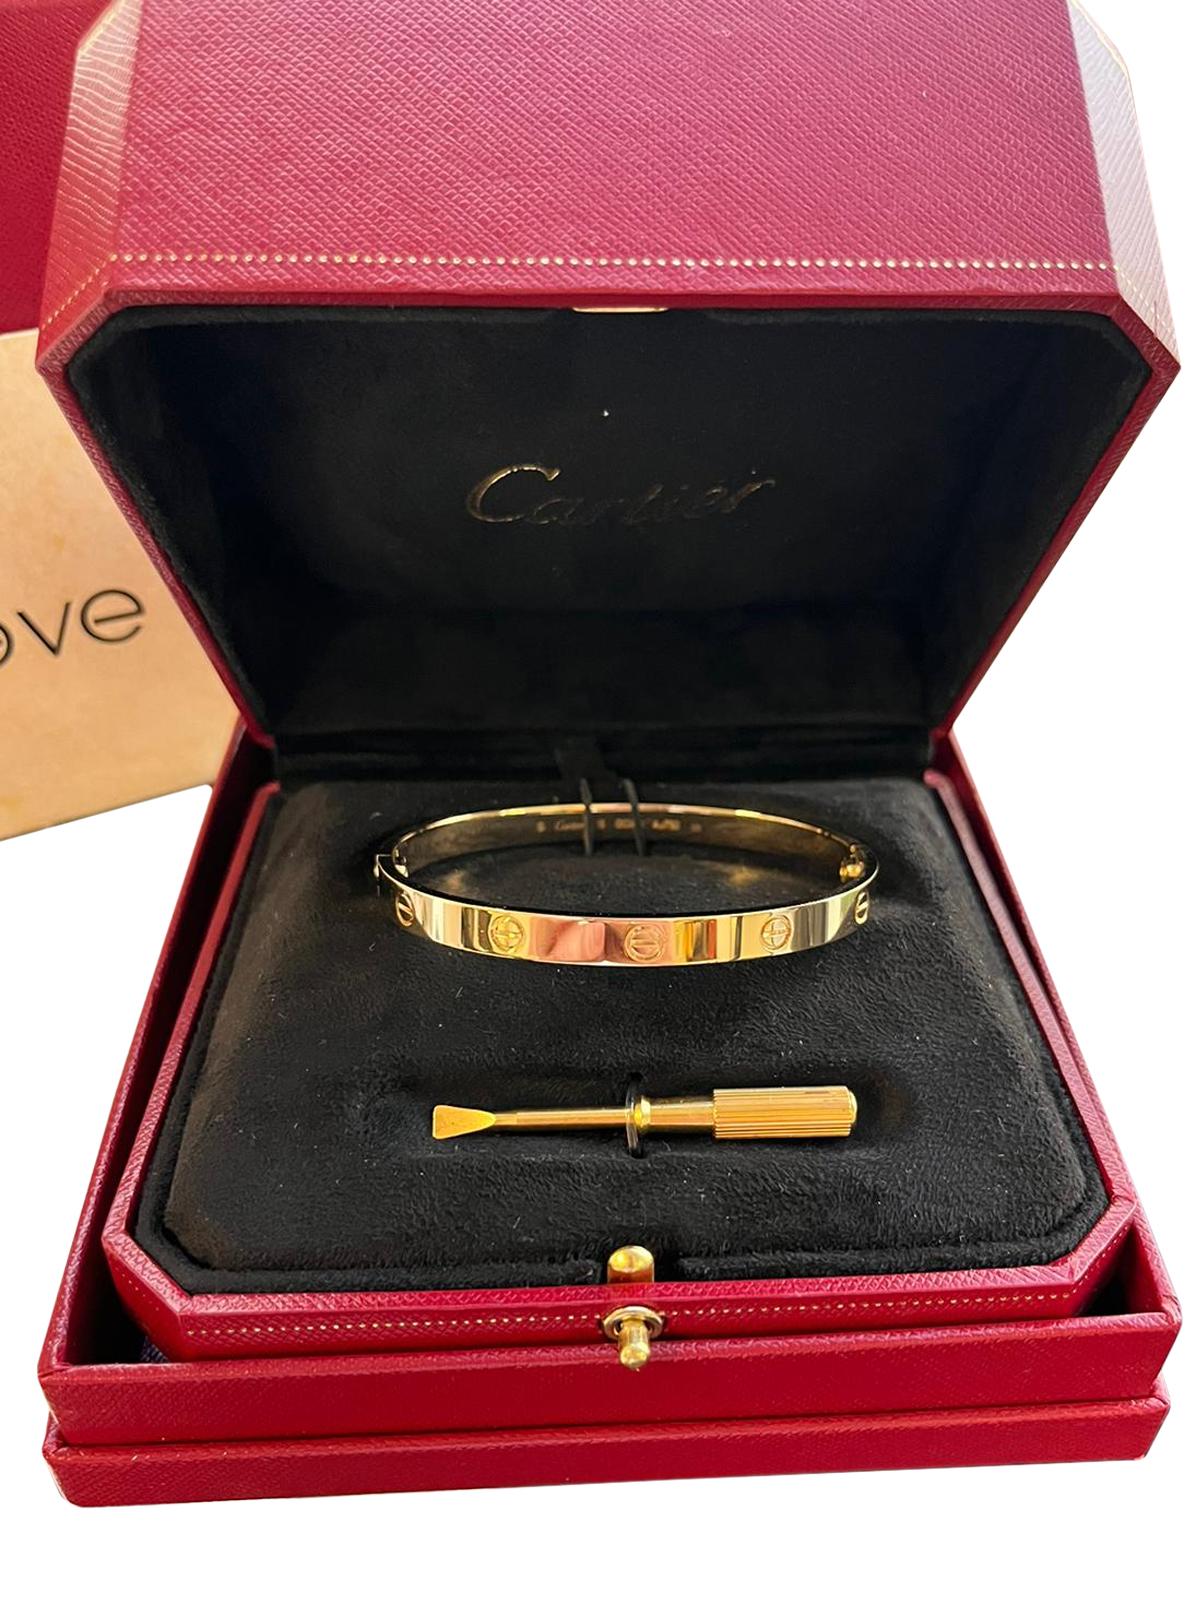 Cartier Love Bracelet 18K Yellow Gold Size 19 With Screwdriver Bangle For Sale 4